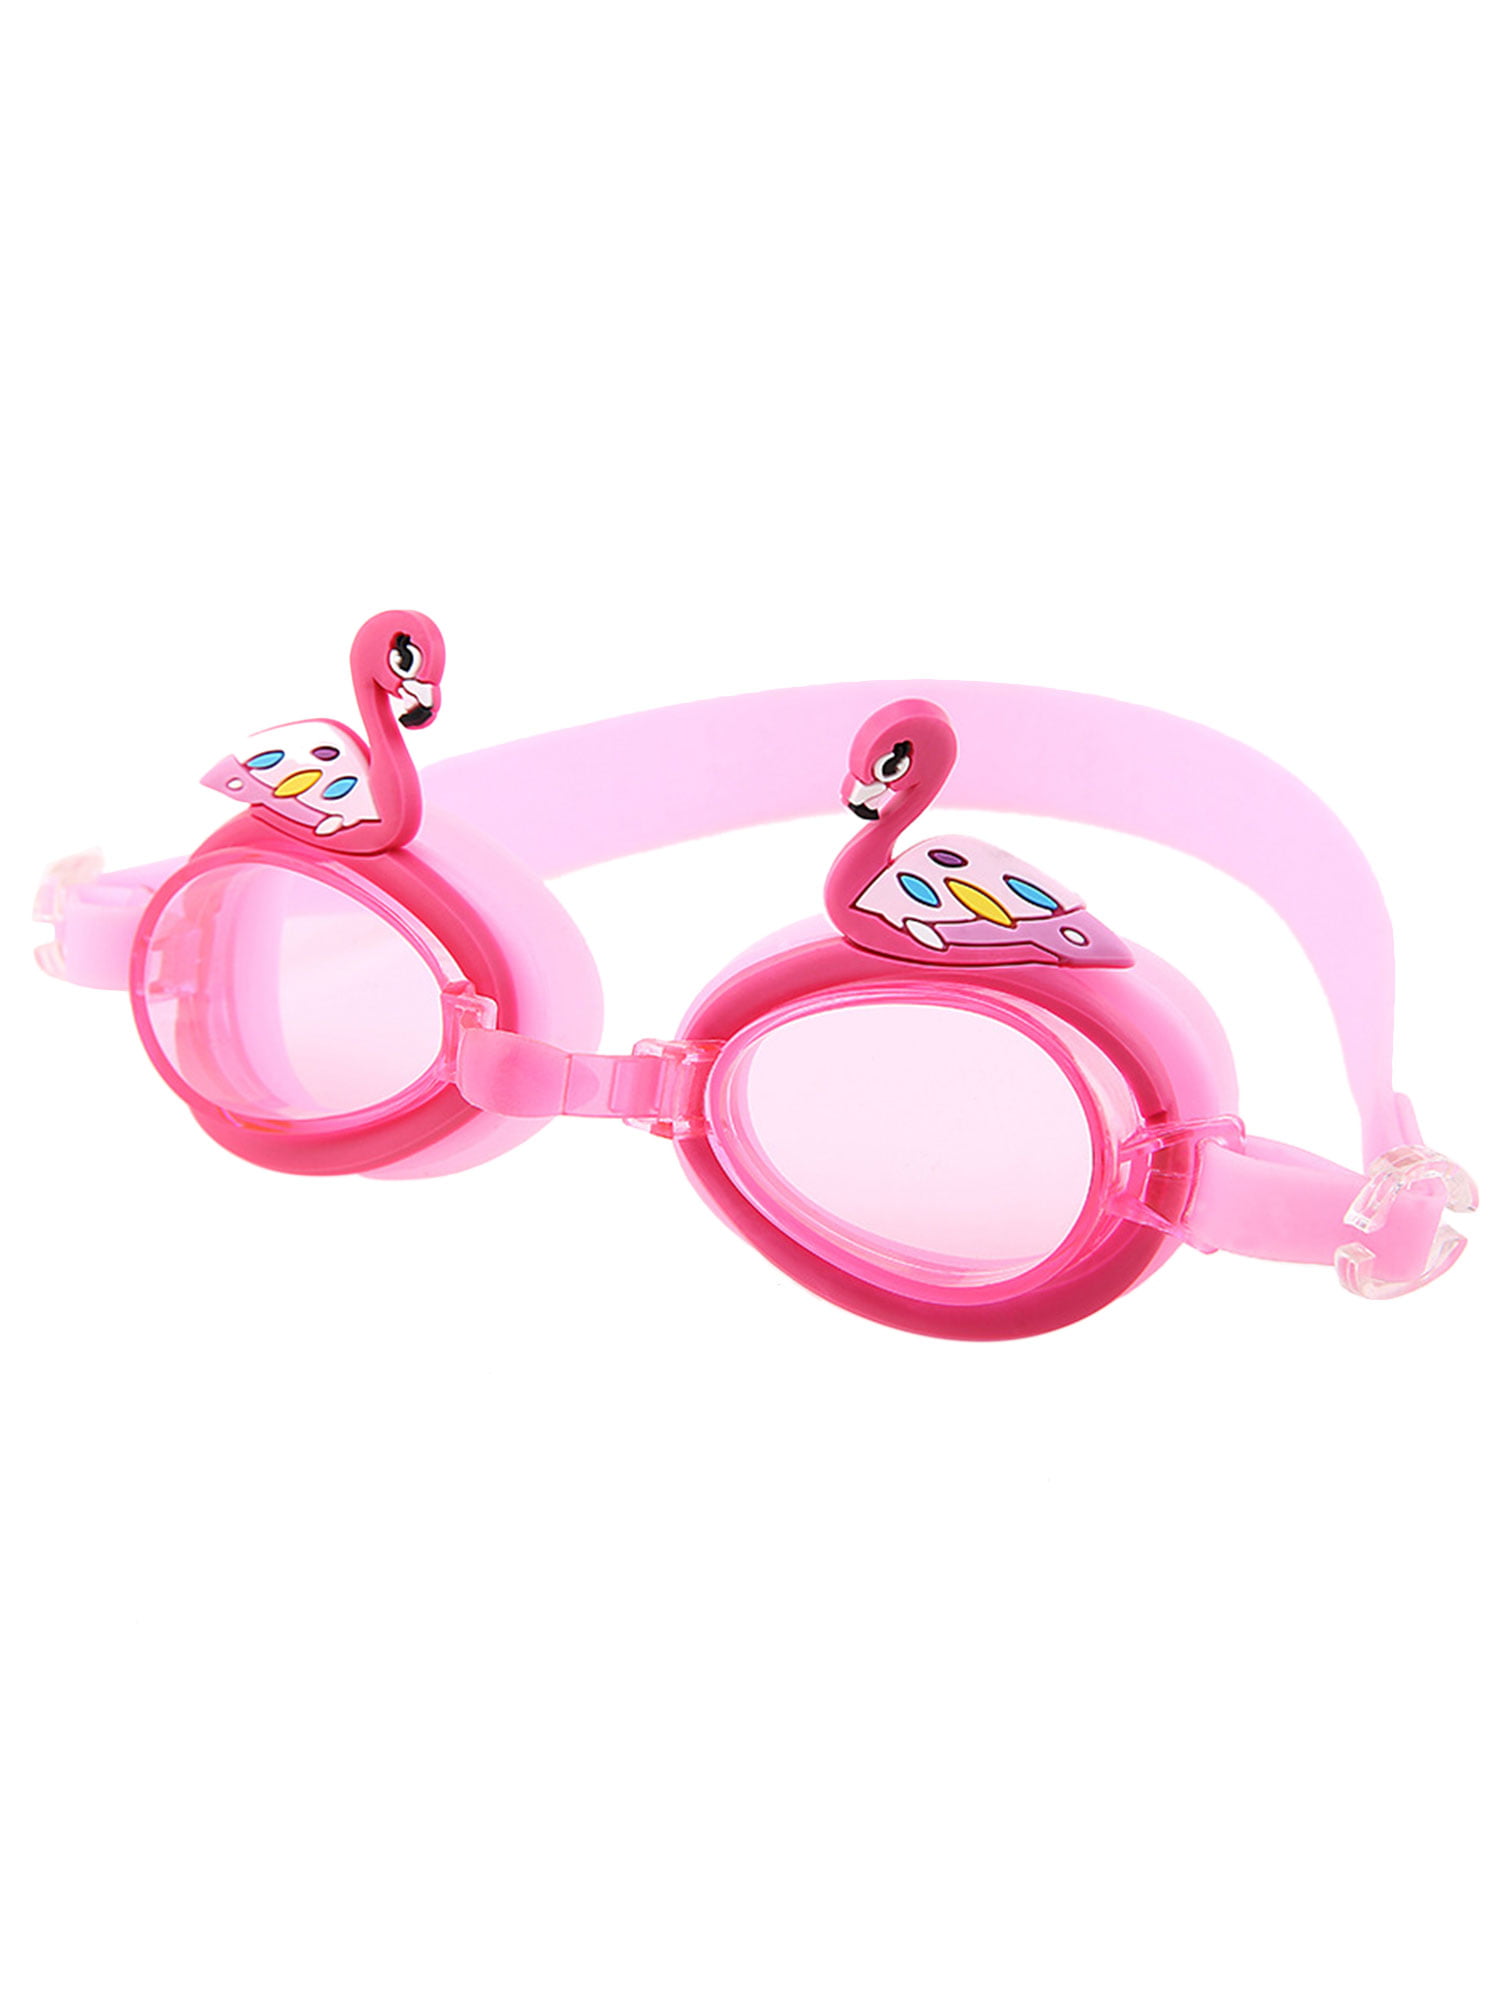 Childrens Goggles with No Leaking Anti-Fog Lens and UV Protection Kids Swimming Goggles,Adjustable Strap for 3-12 Girls and Boys